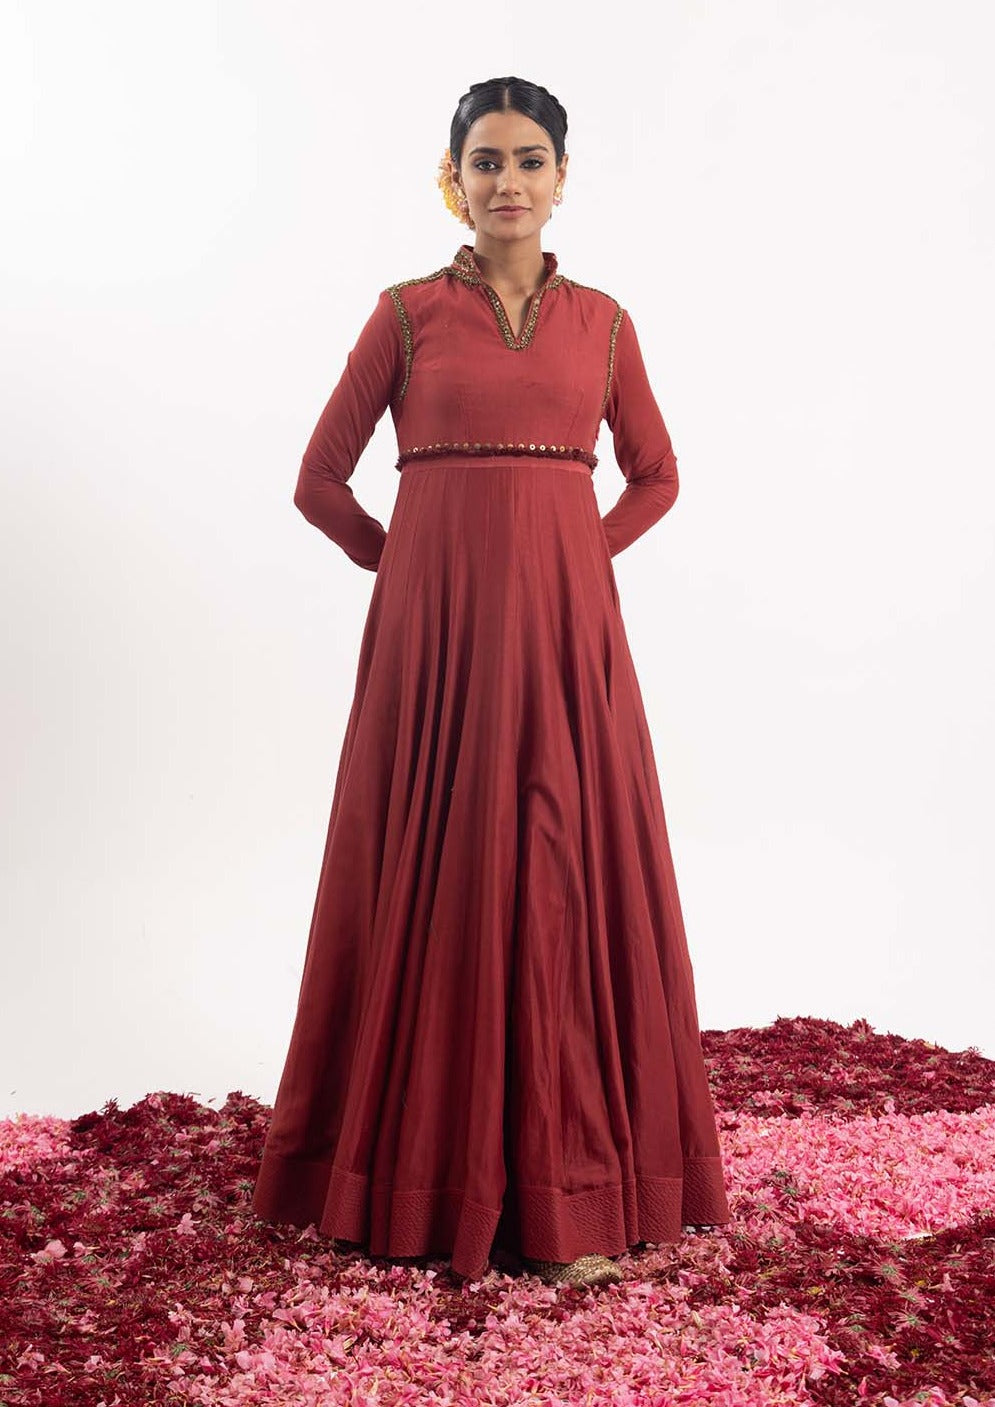 Exquisite one-piece anarkali dress in wine-colored cotton silk fabric.